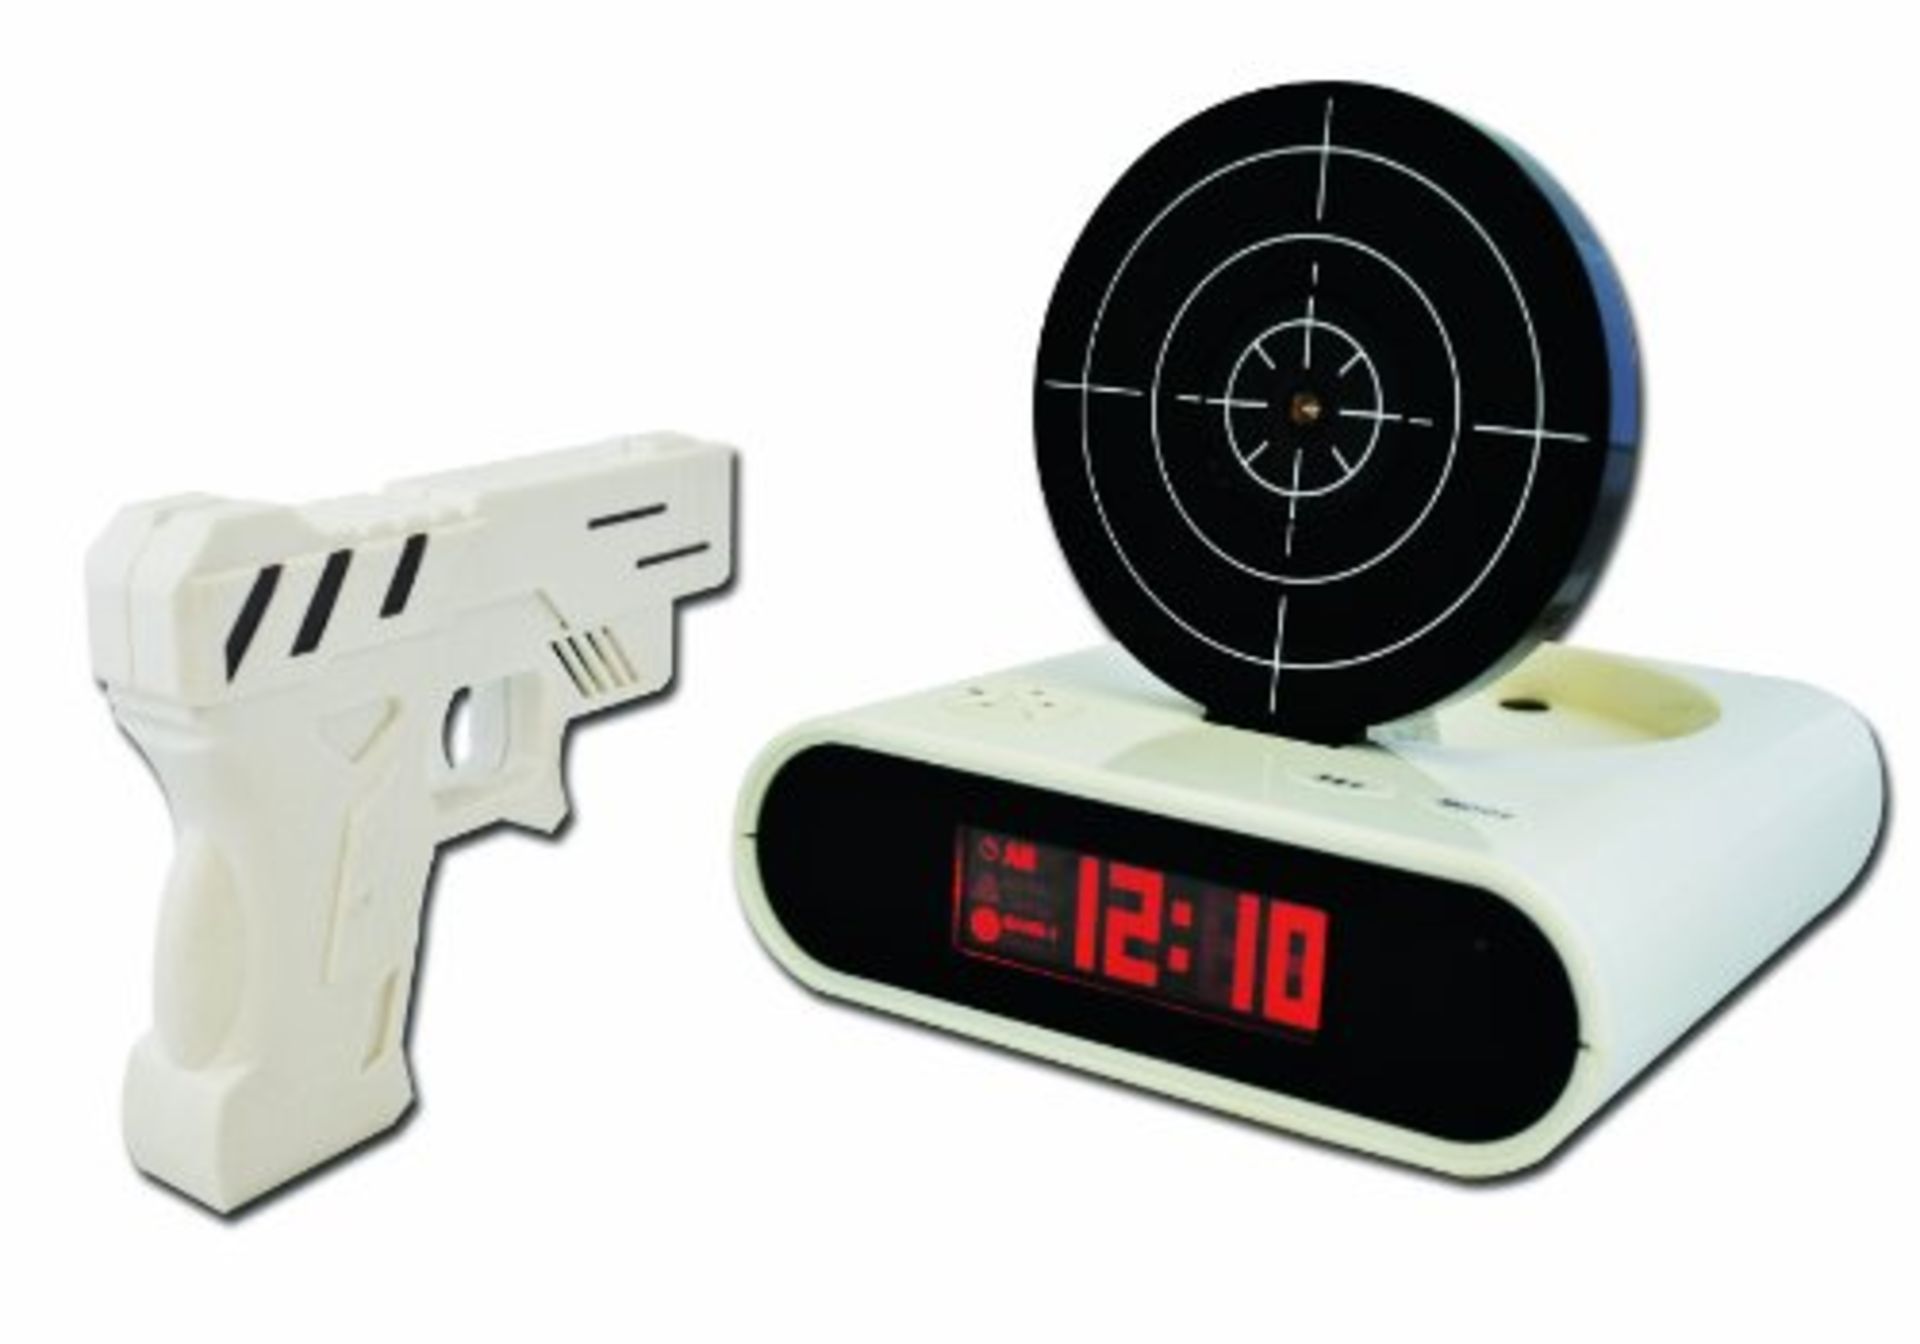 V Target practice alarm clock complete with electronic gun